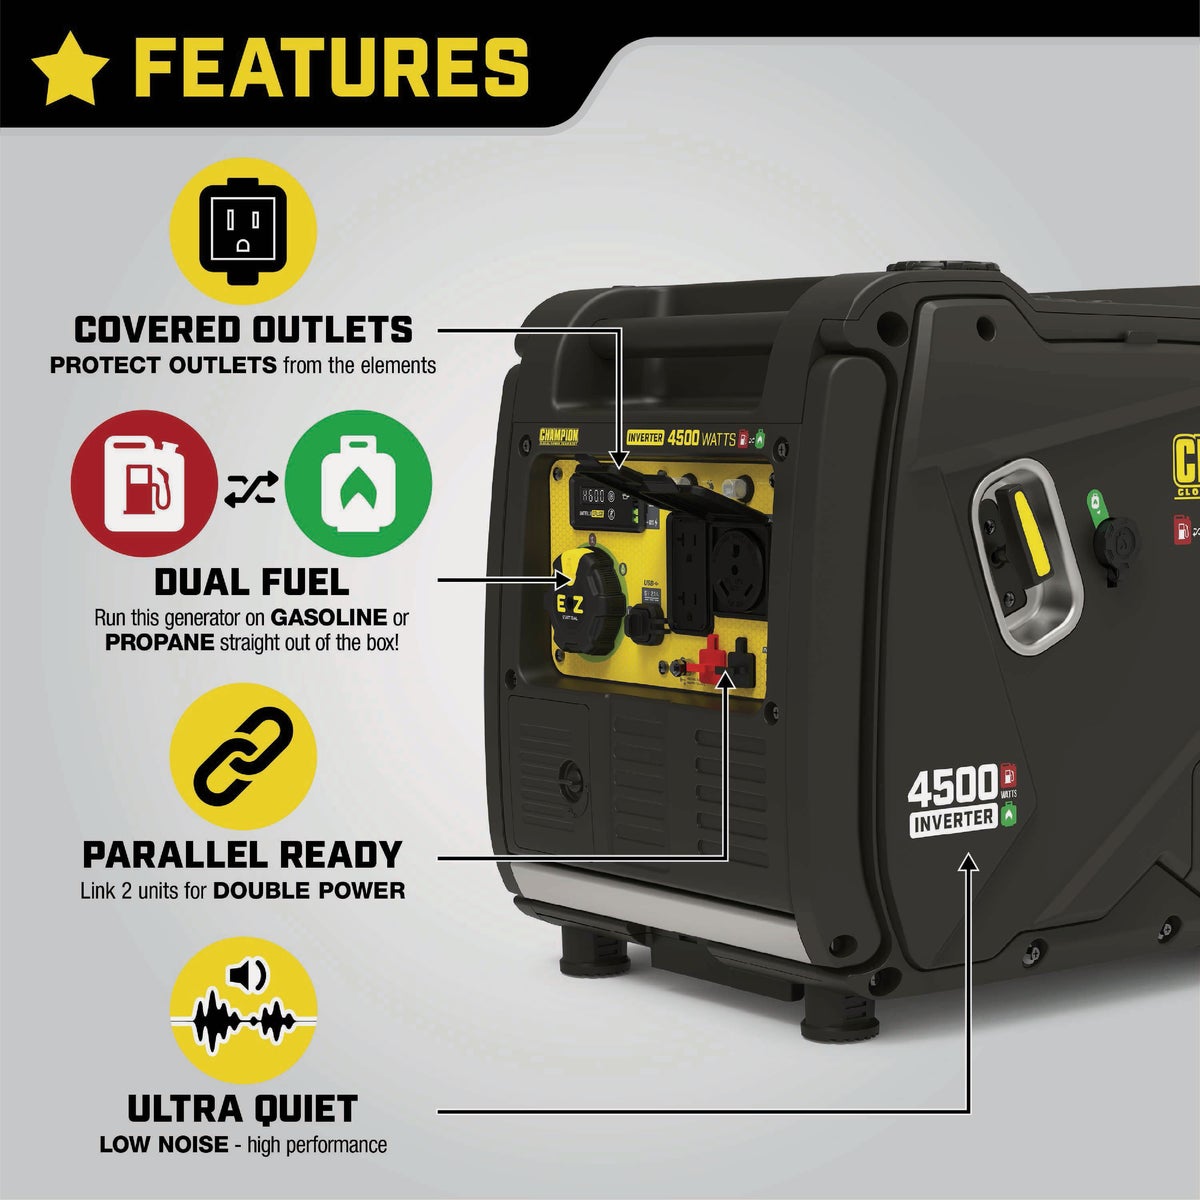 Champion Power Equipment 200991 Champion 4500W Dual Fuel Electric/Recoil Inverter Generator with Quiet Technology 200991